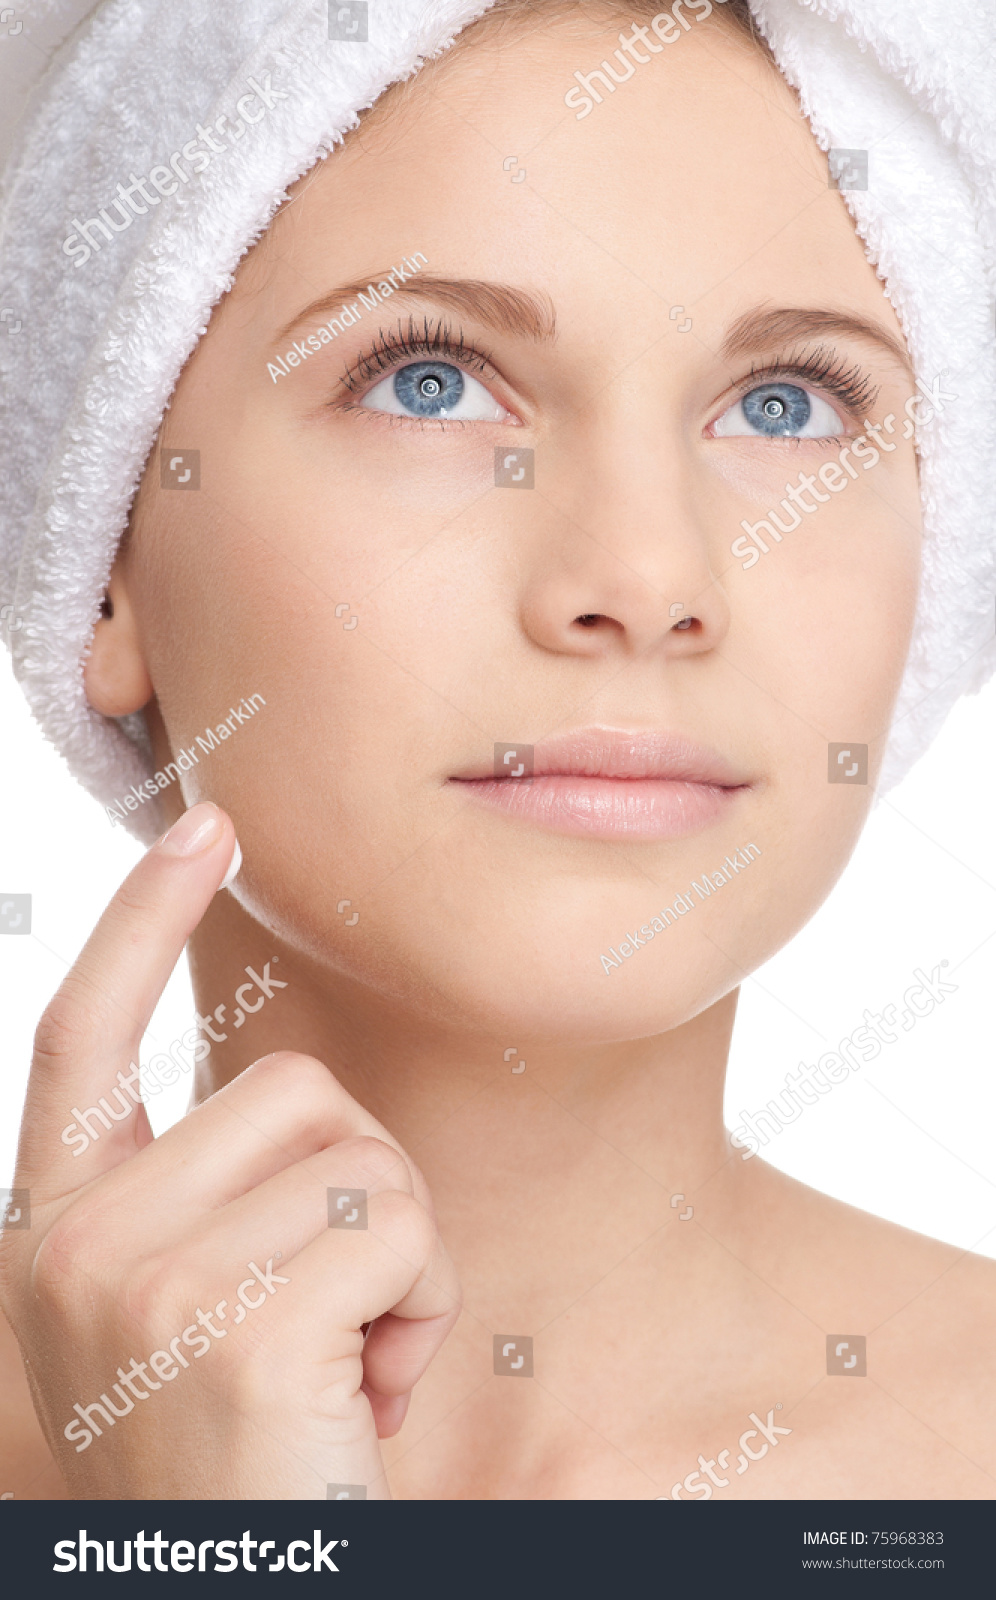 Closeup of young beautiful woman with perfect skin applying cream. Spa #75968383